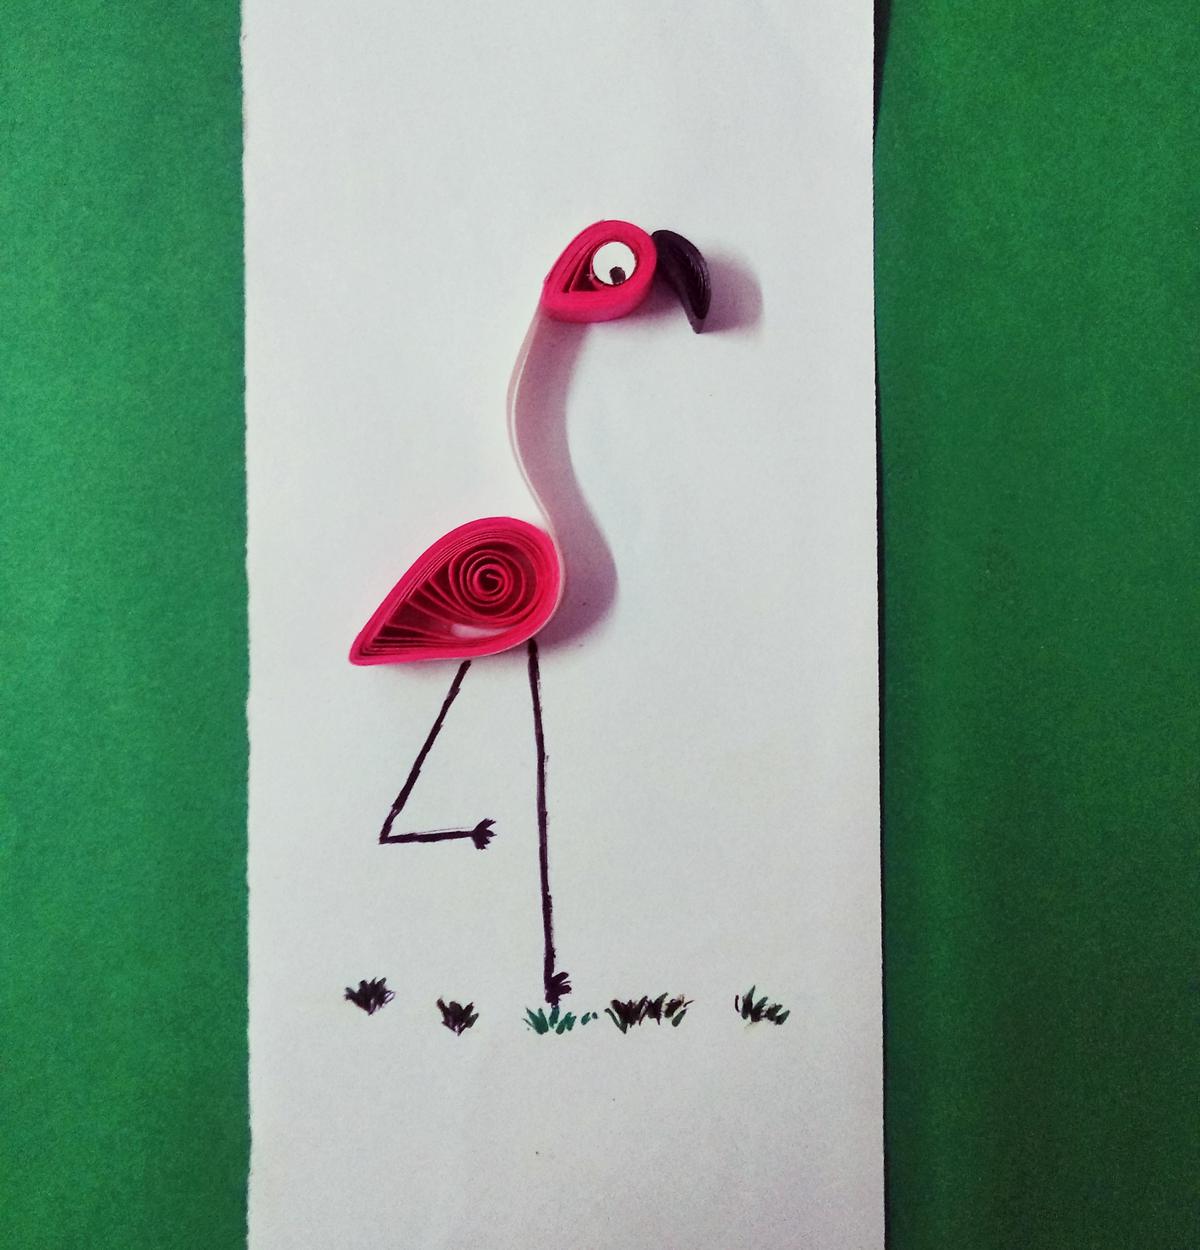 Angeline’s flamingo made with paper quilling technique 